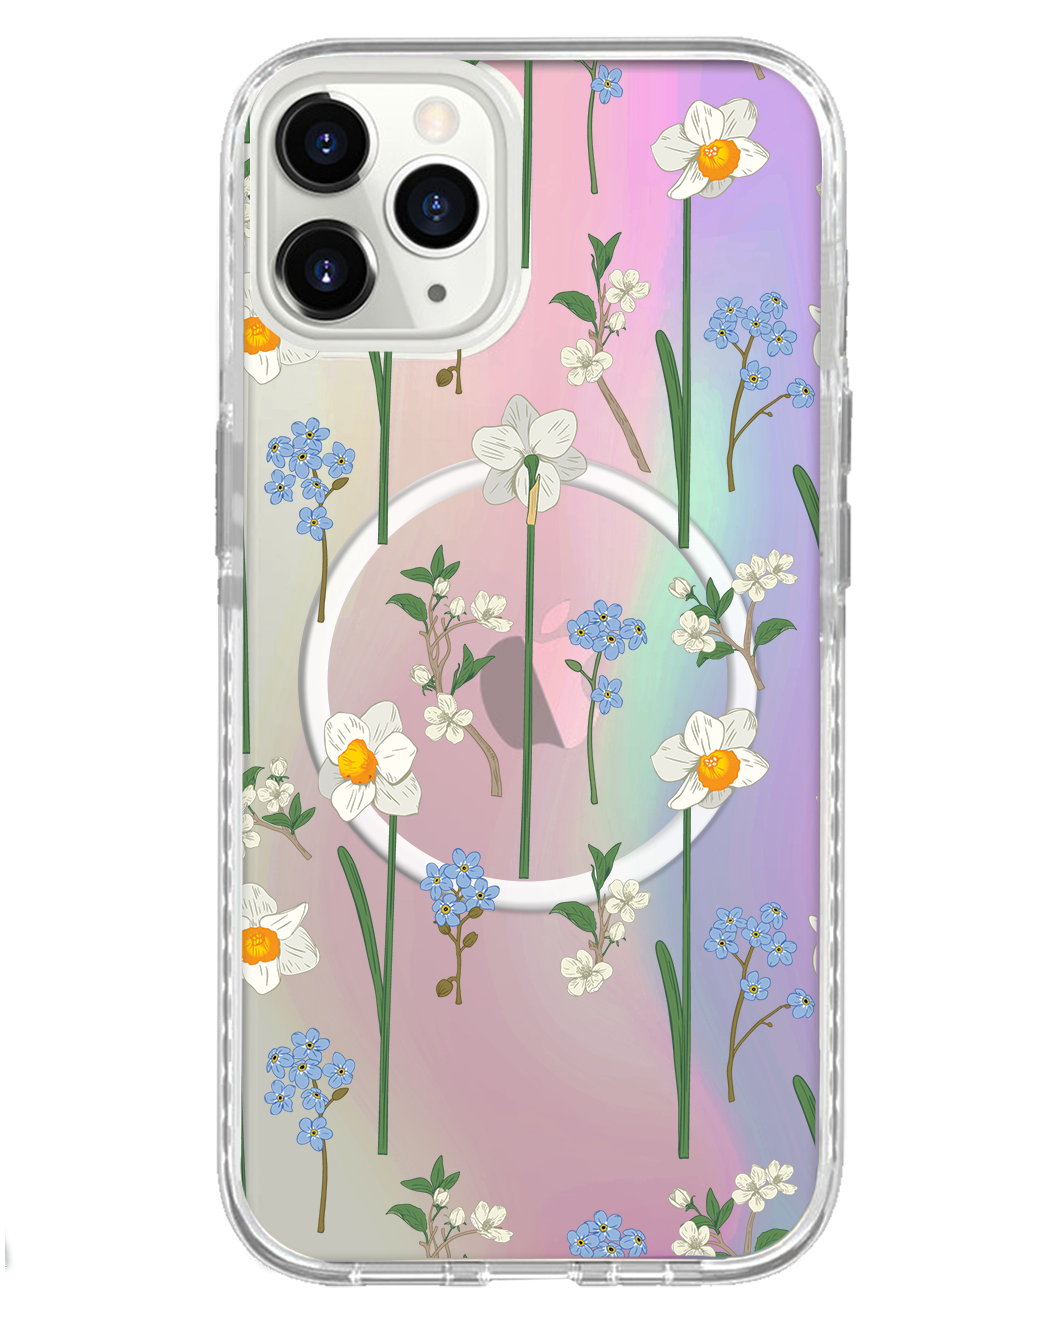 iPhone Rearguard Holo - December Narcissus